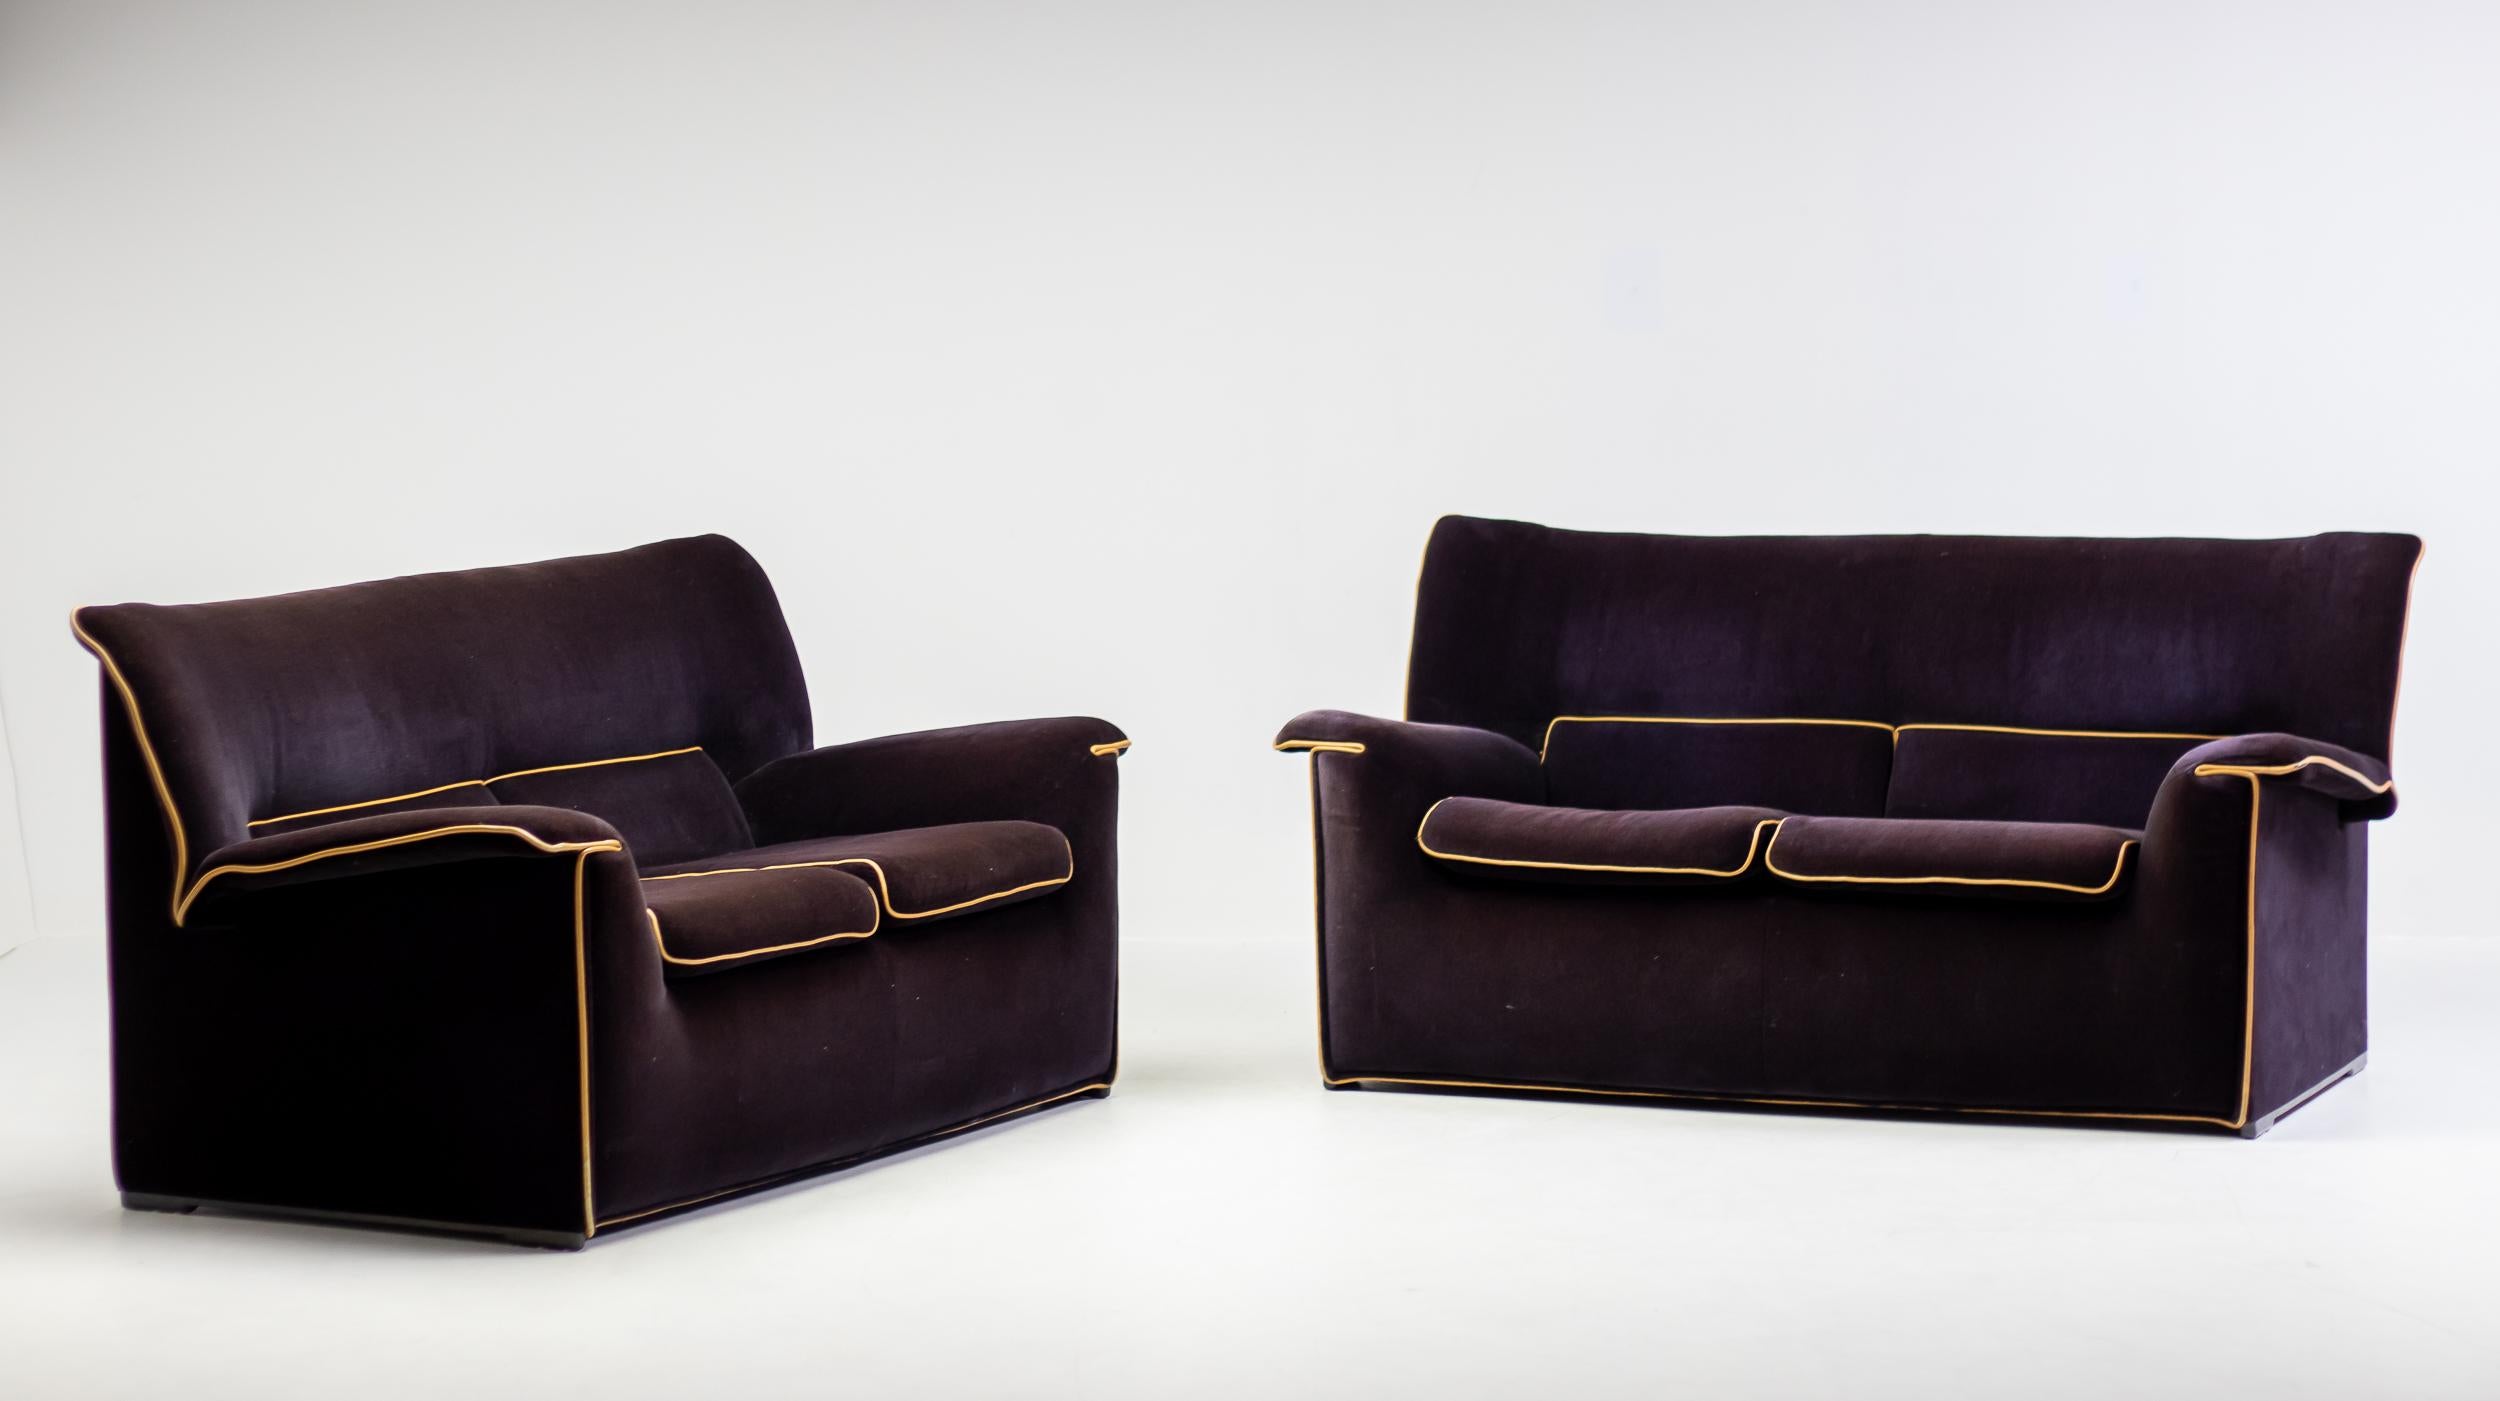 Lauriana 2-seater sofa designed in 1978 by Afra & Tobia Scarpa for B&B Italia. 
Eggplant removable velvet upholstery with camel leather piping. Mounted on a steel frame with plastic feet. 
Two loose seating cushions. Good condition with minimal